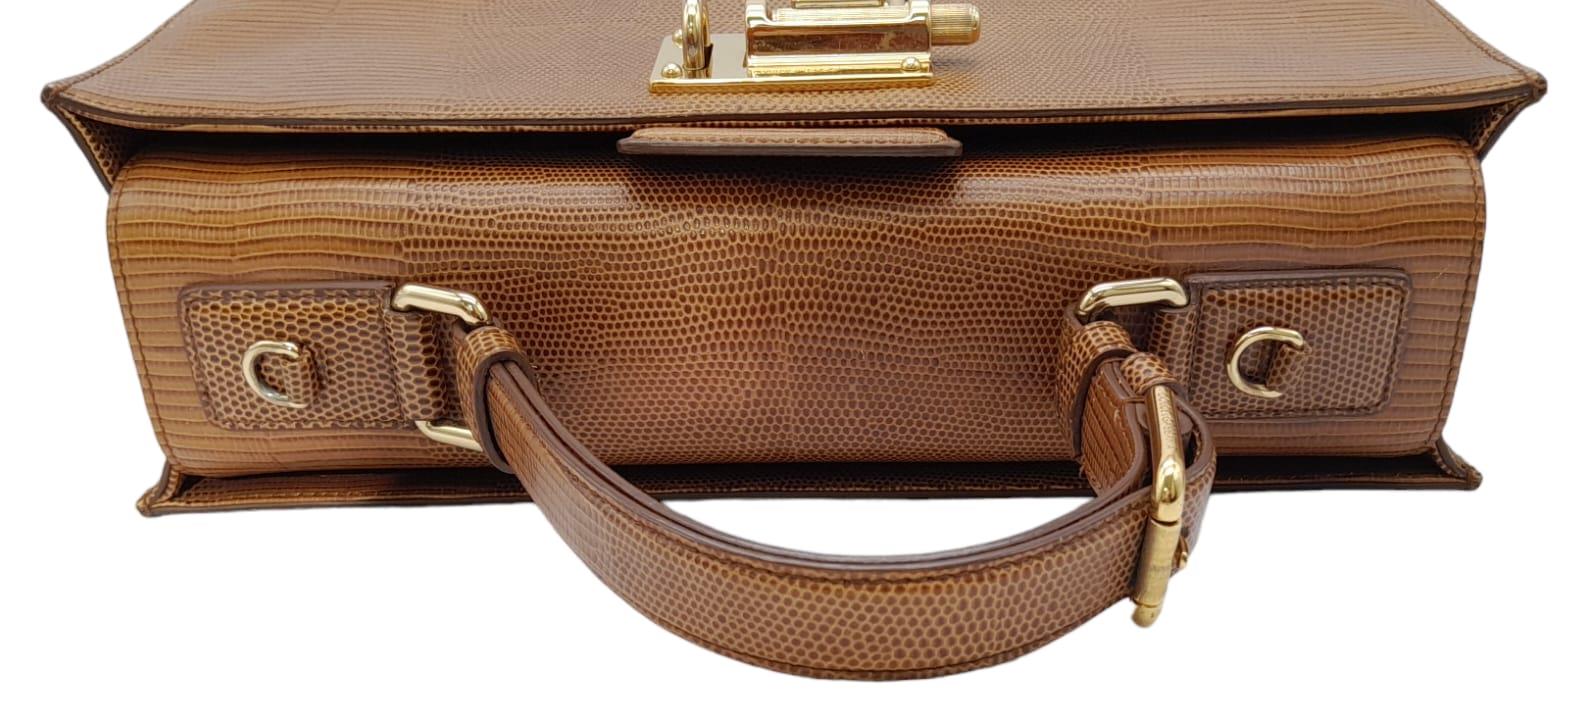 A Dolce & Gabbana Brown 'Monica' Bag. Lizard embossed leather exterior, with a single handle and - Image 6 of 16